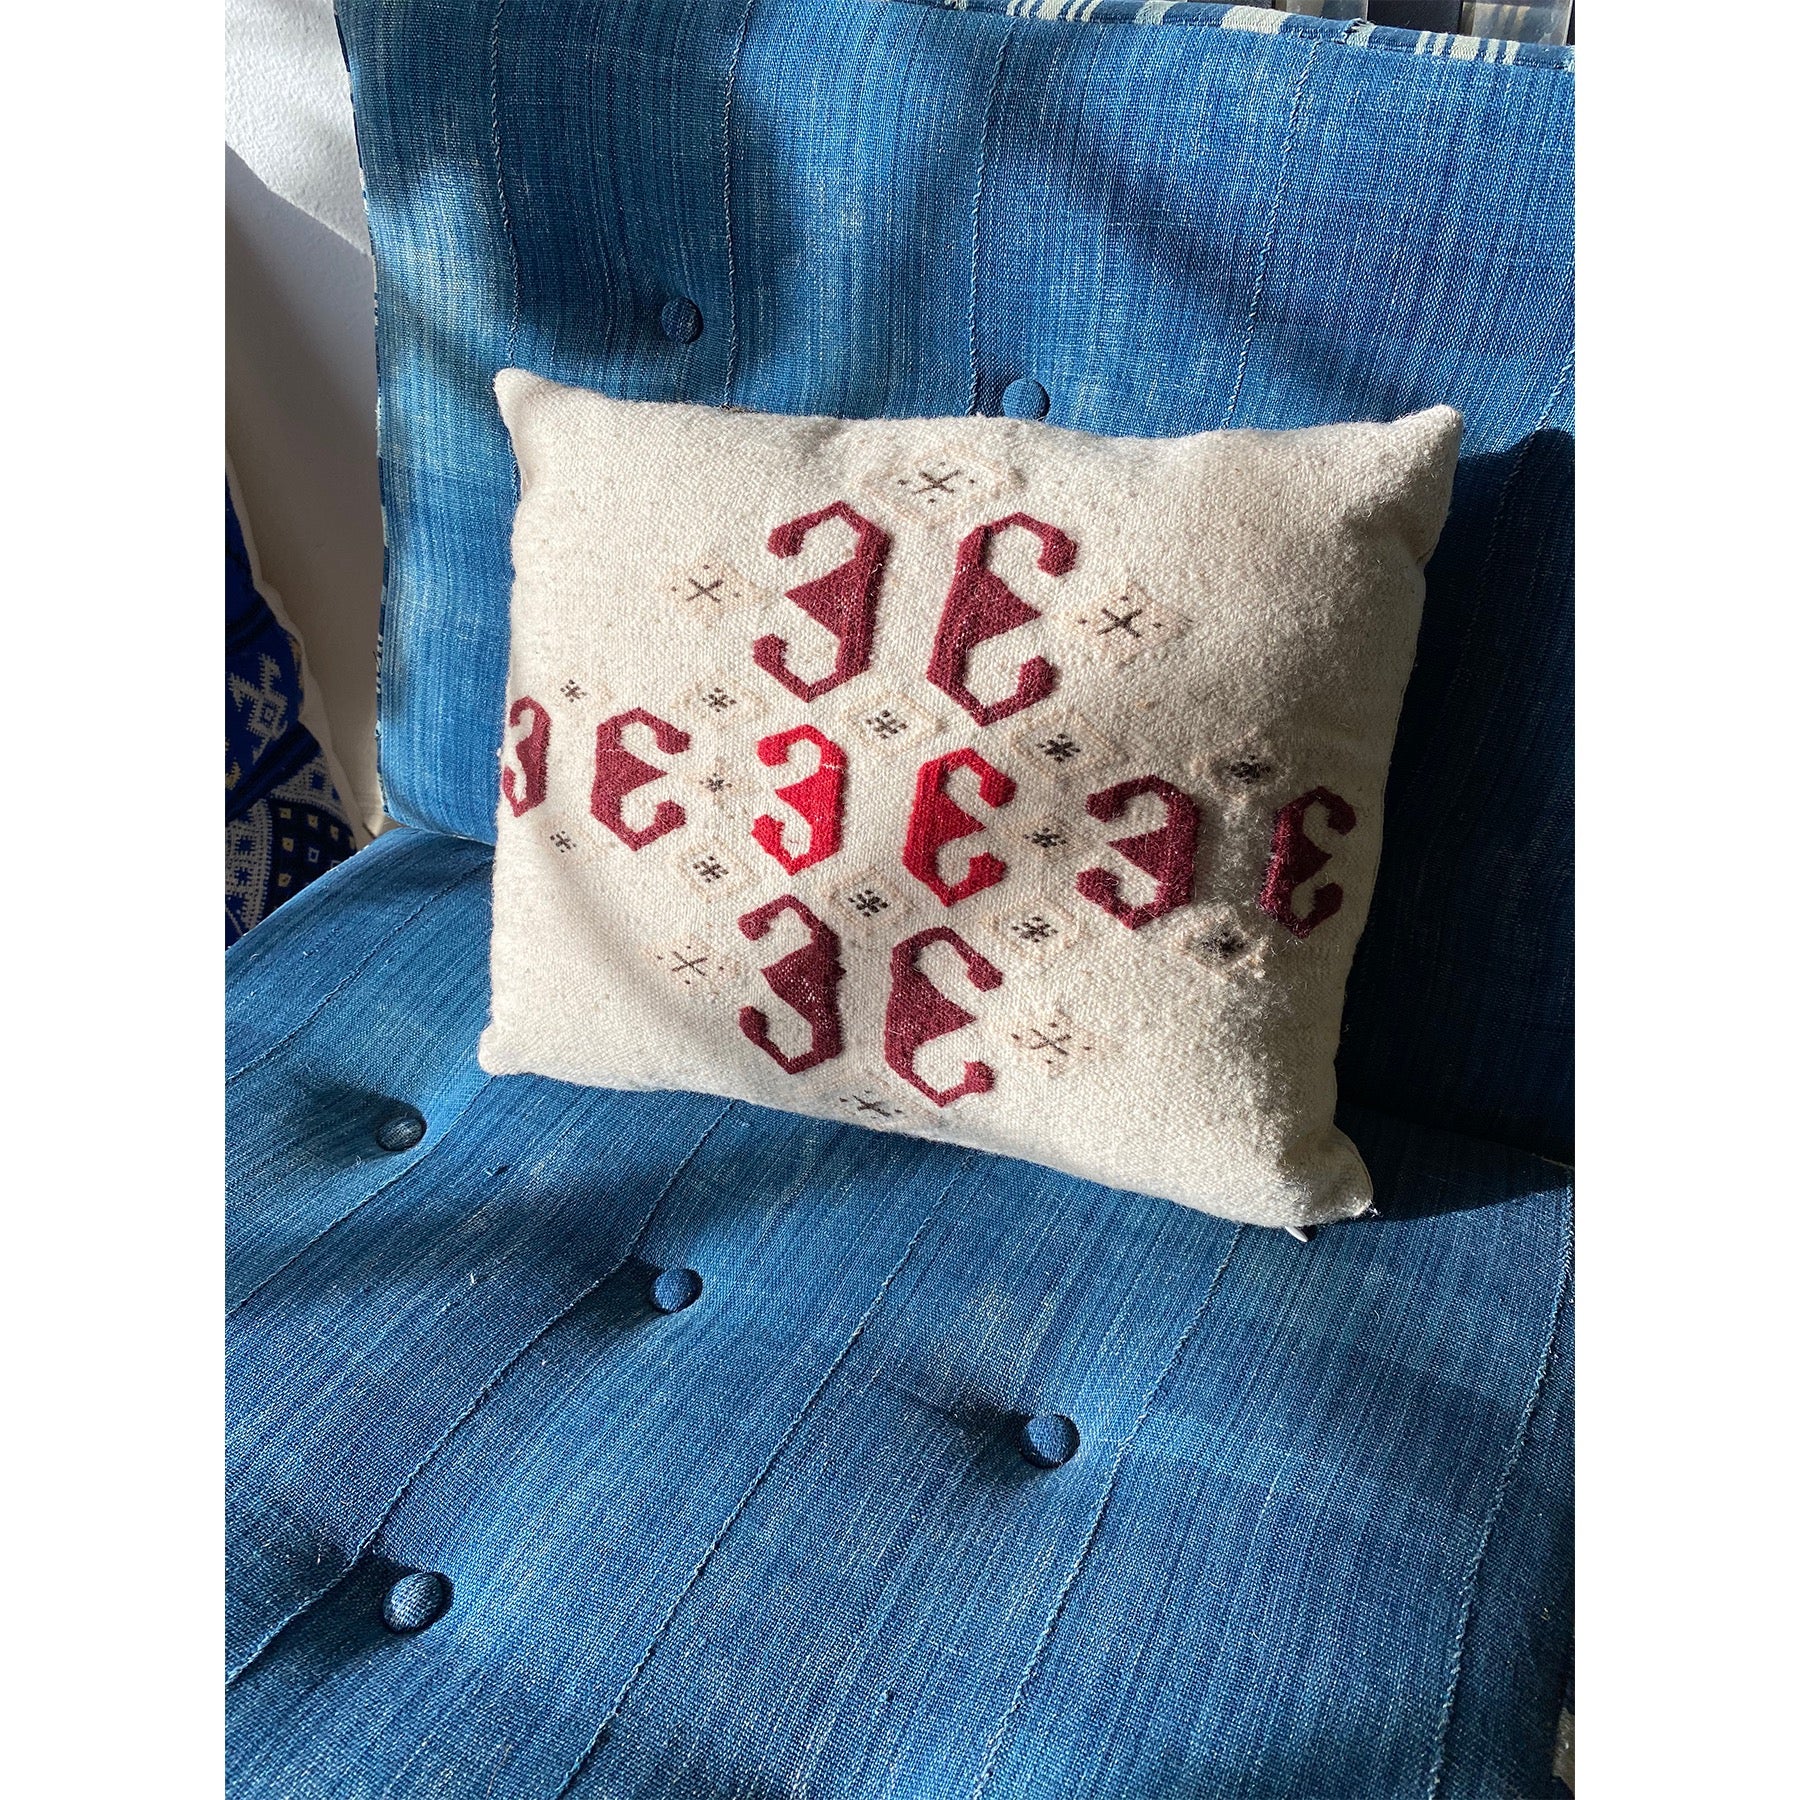 Modern Moroccan pillow in reds